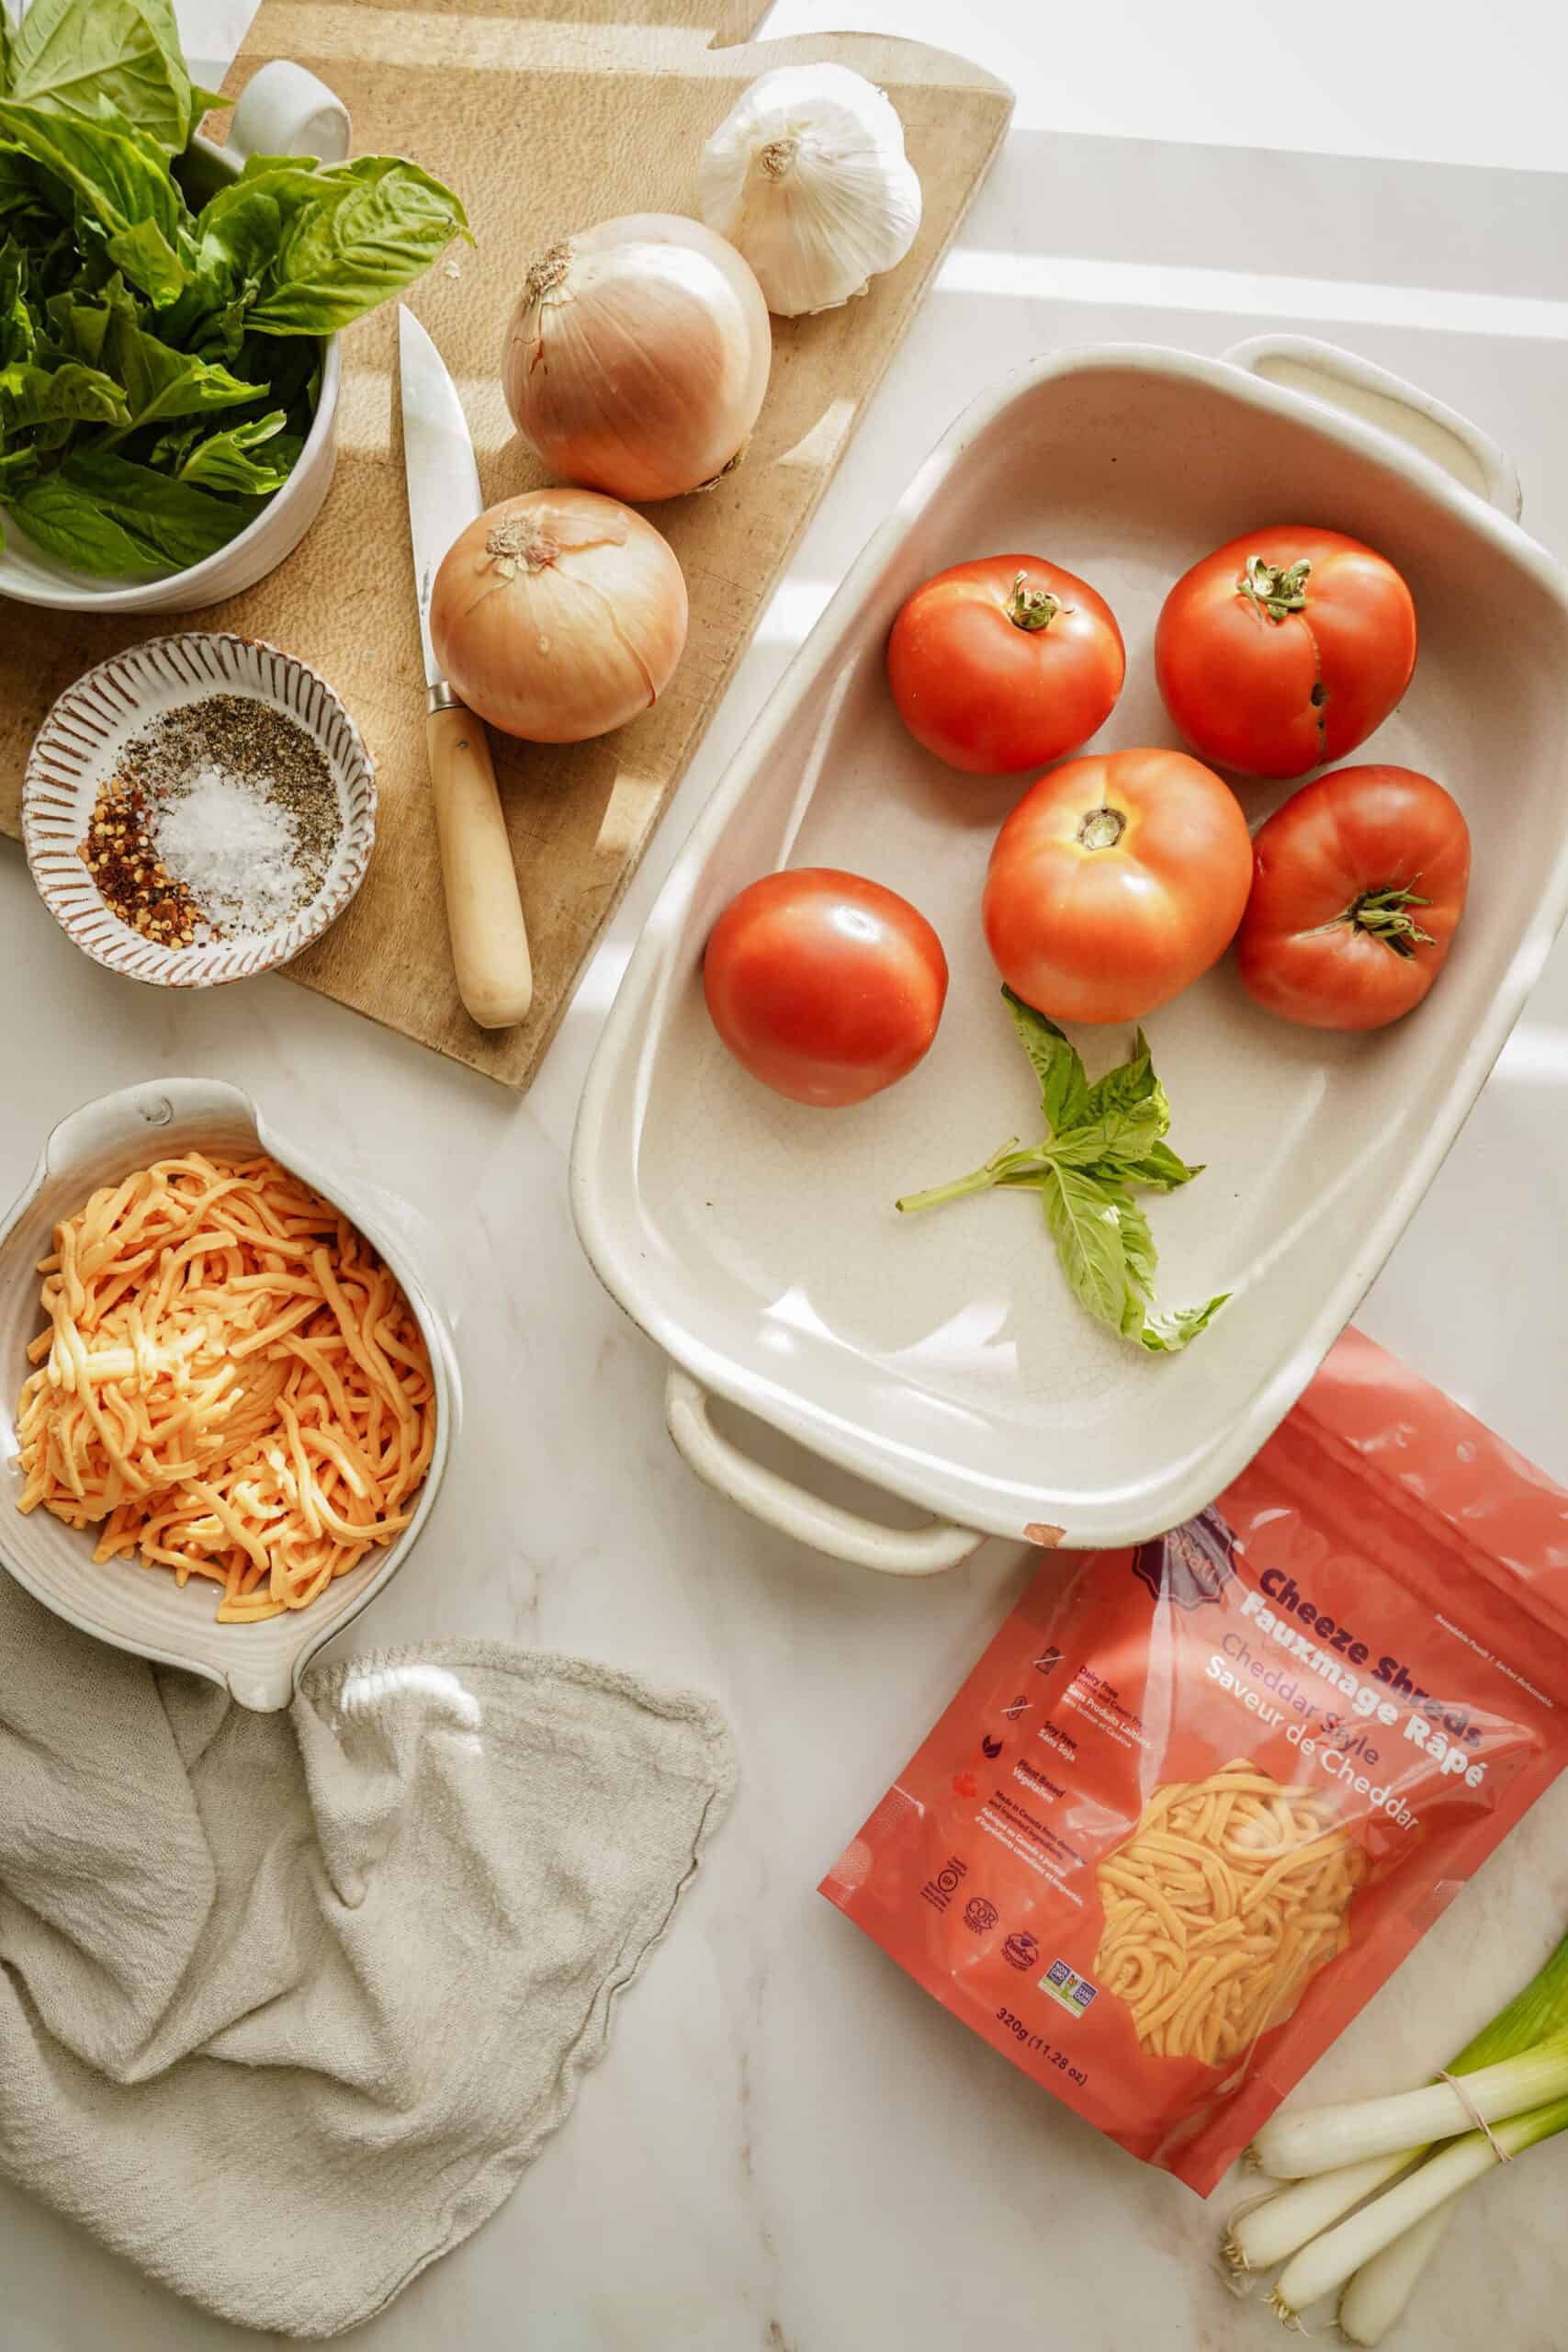 Ingredients for creamy tomato soup in a casserole dish